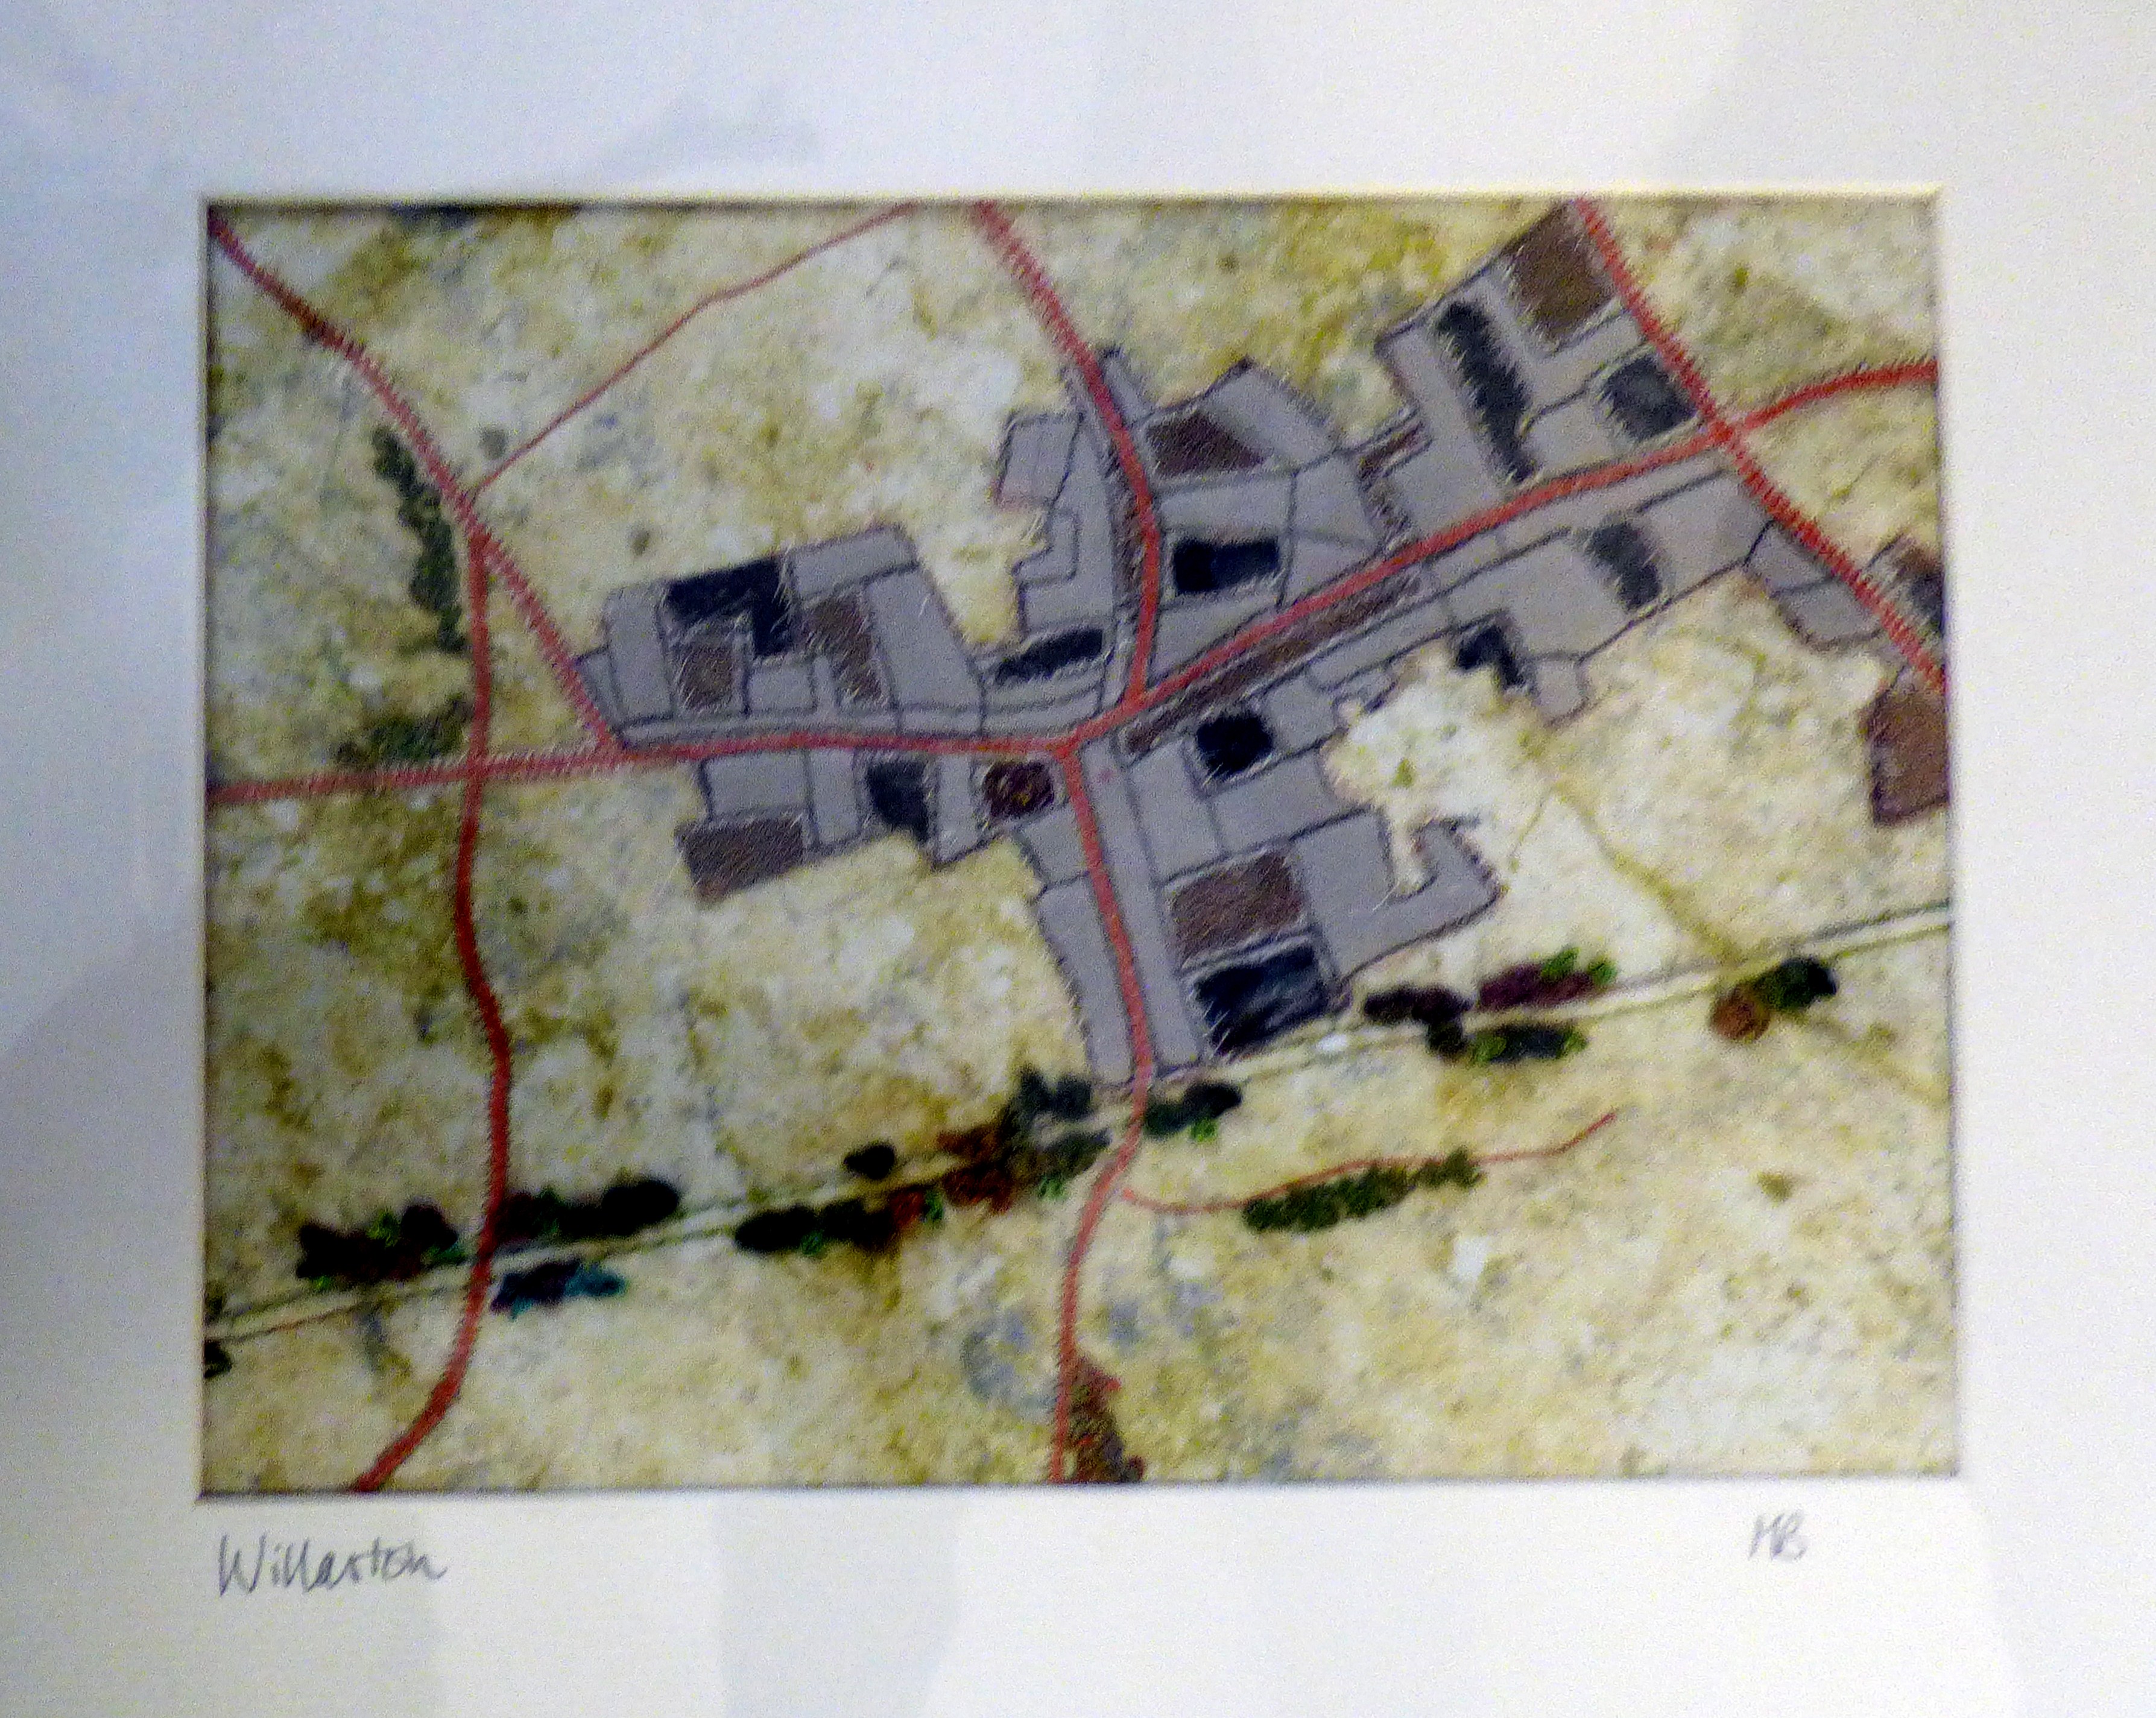 WILLASTON, embroidery by Mary Bryning at "Maps in Stitch" Talk by Mary Bryning, October 2023